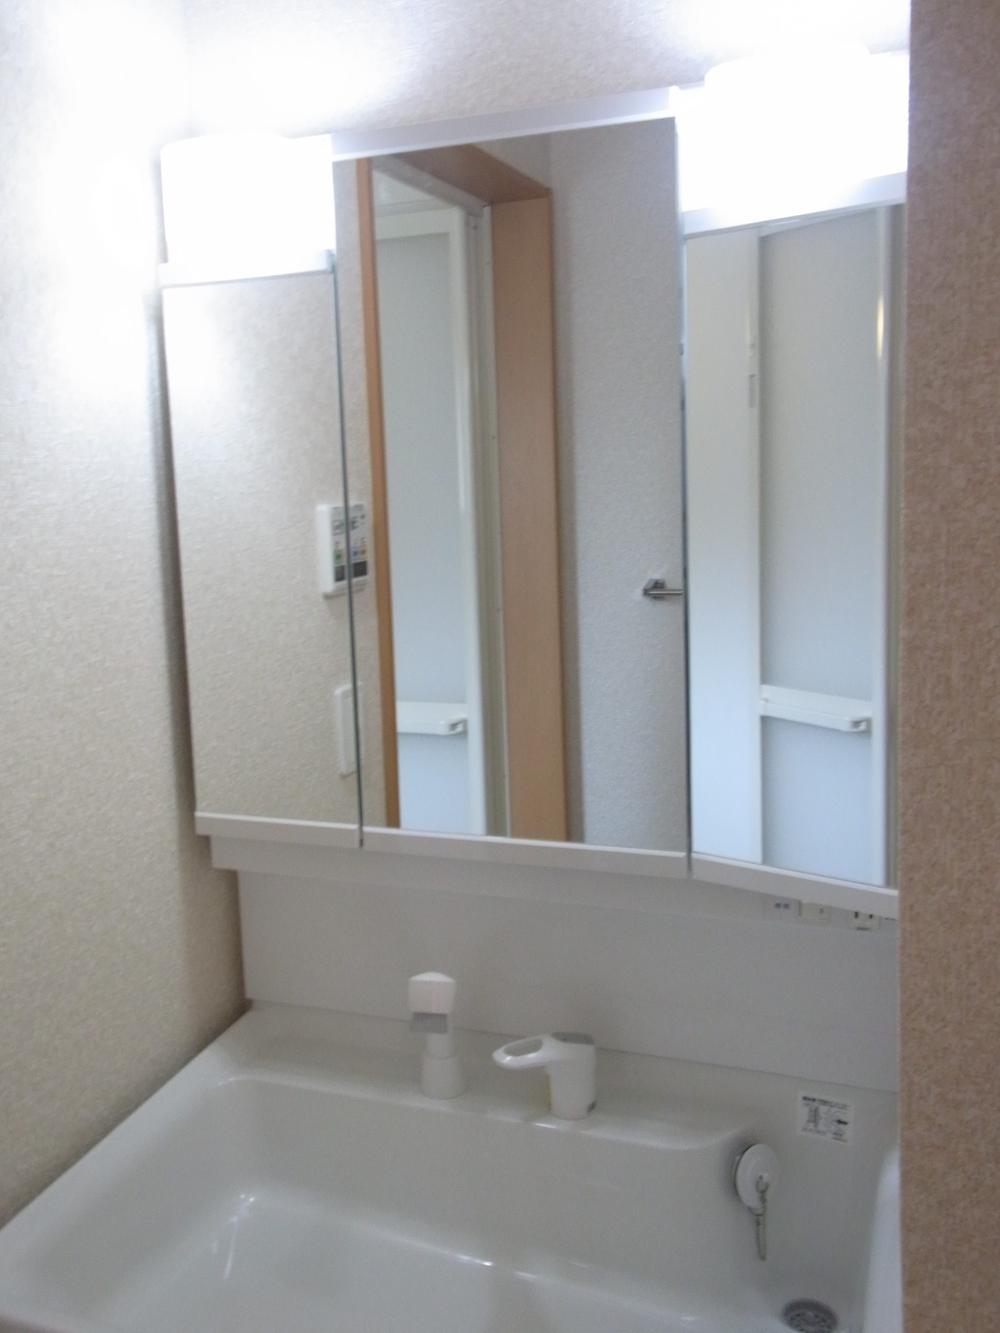 Wash basin, toilet. 1 Building Convenient three-sided mirror type